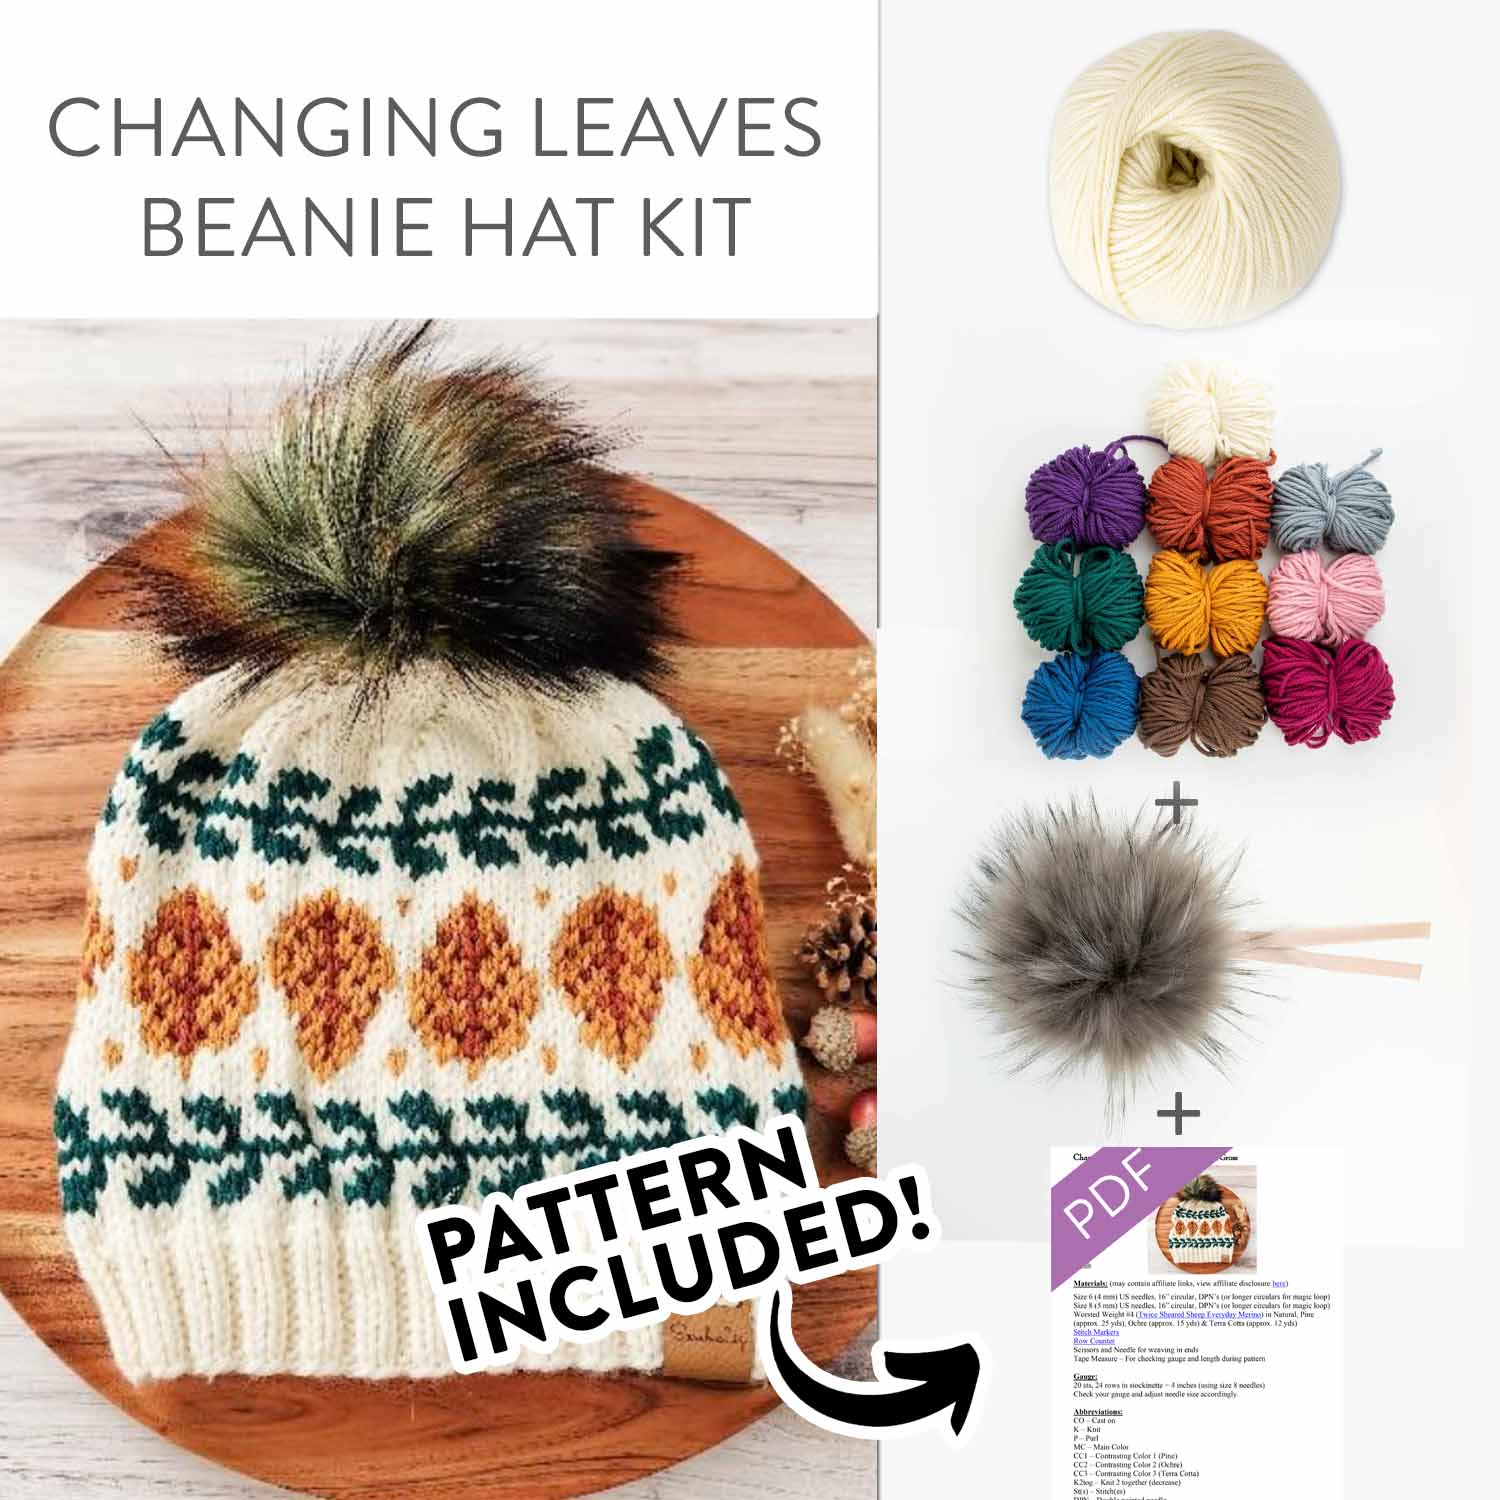 Changing Leaves Beanie Knit Kit